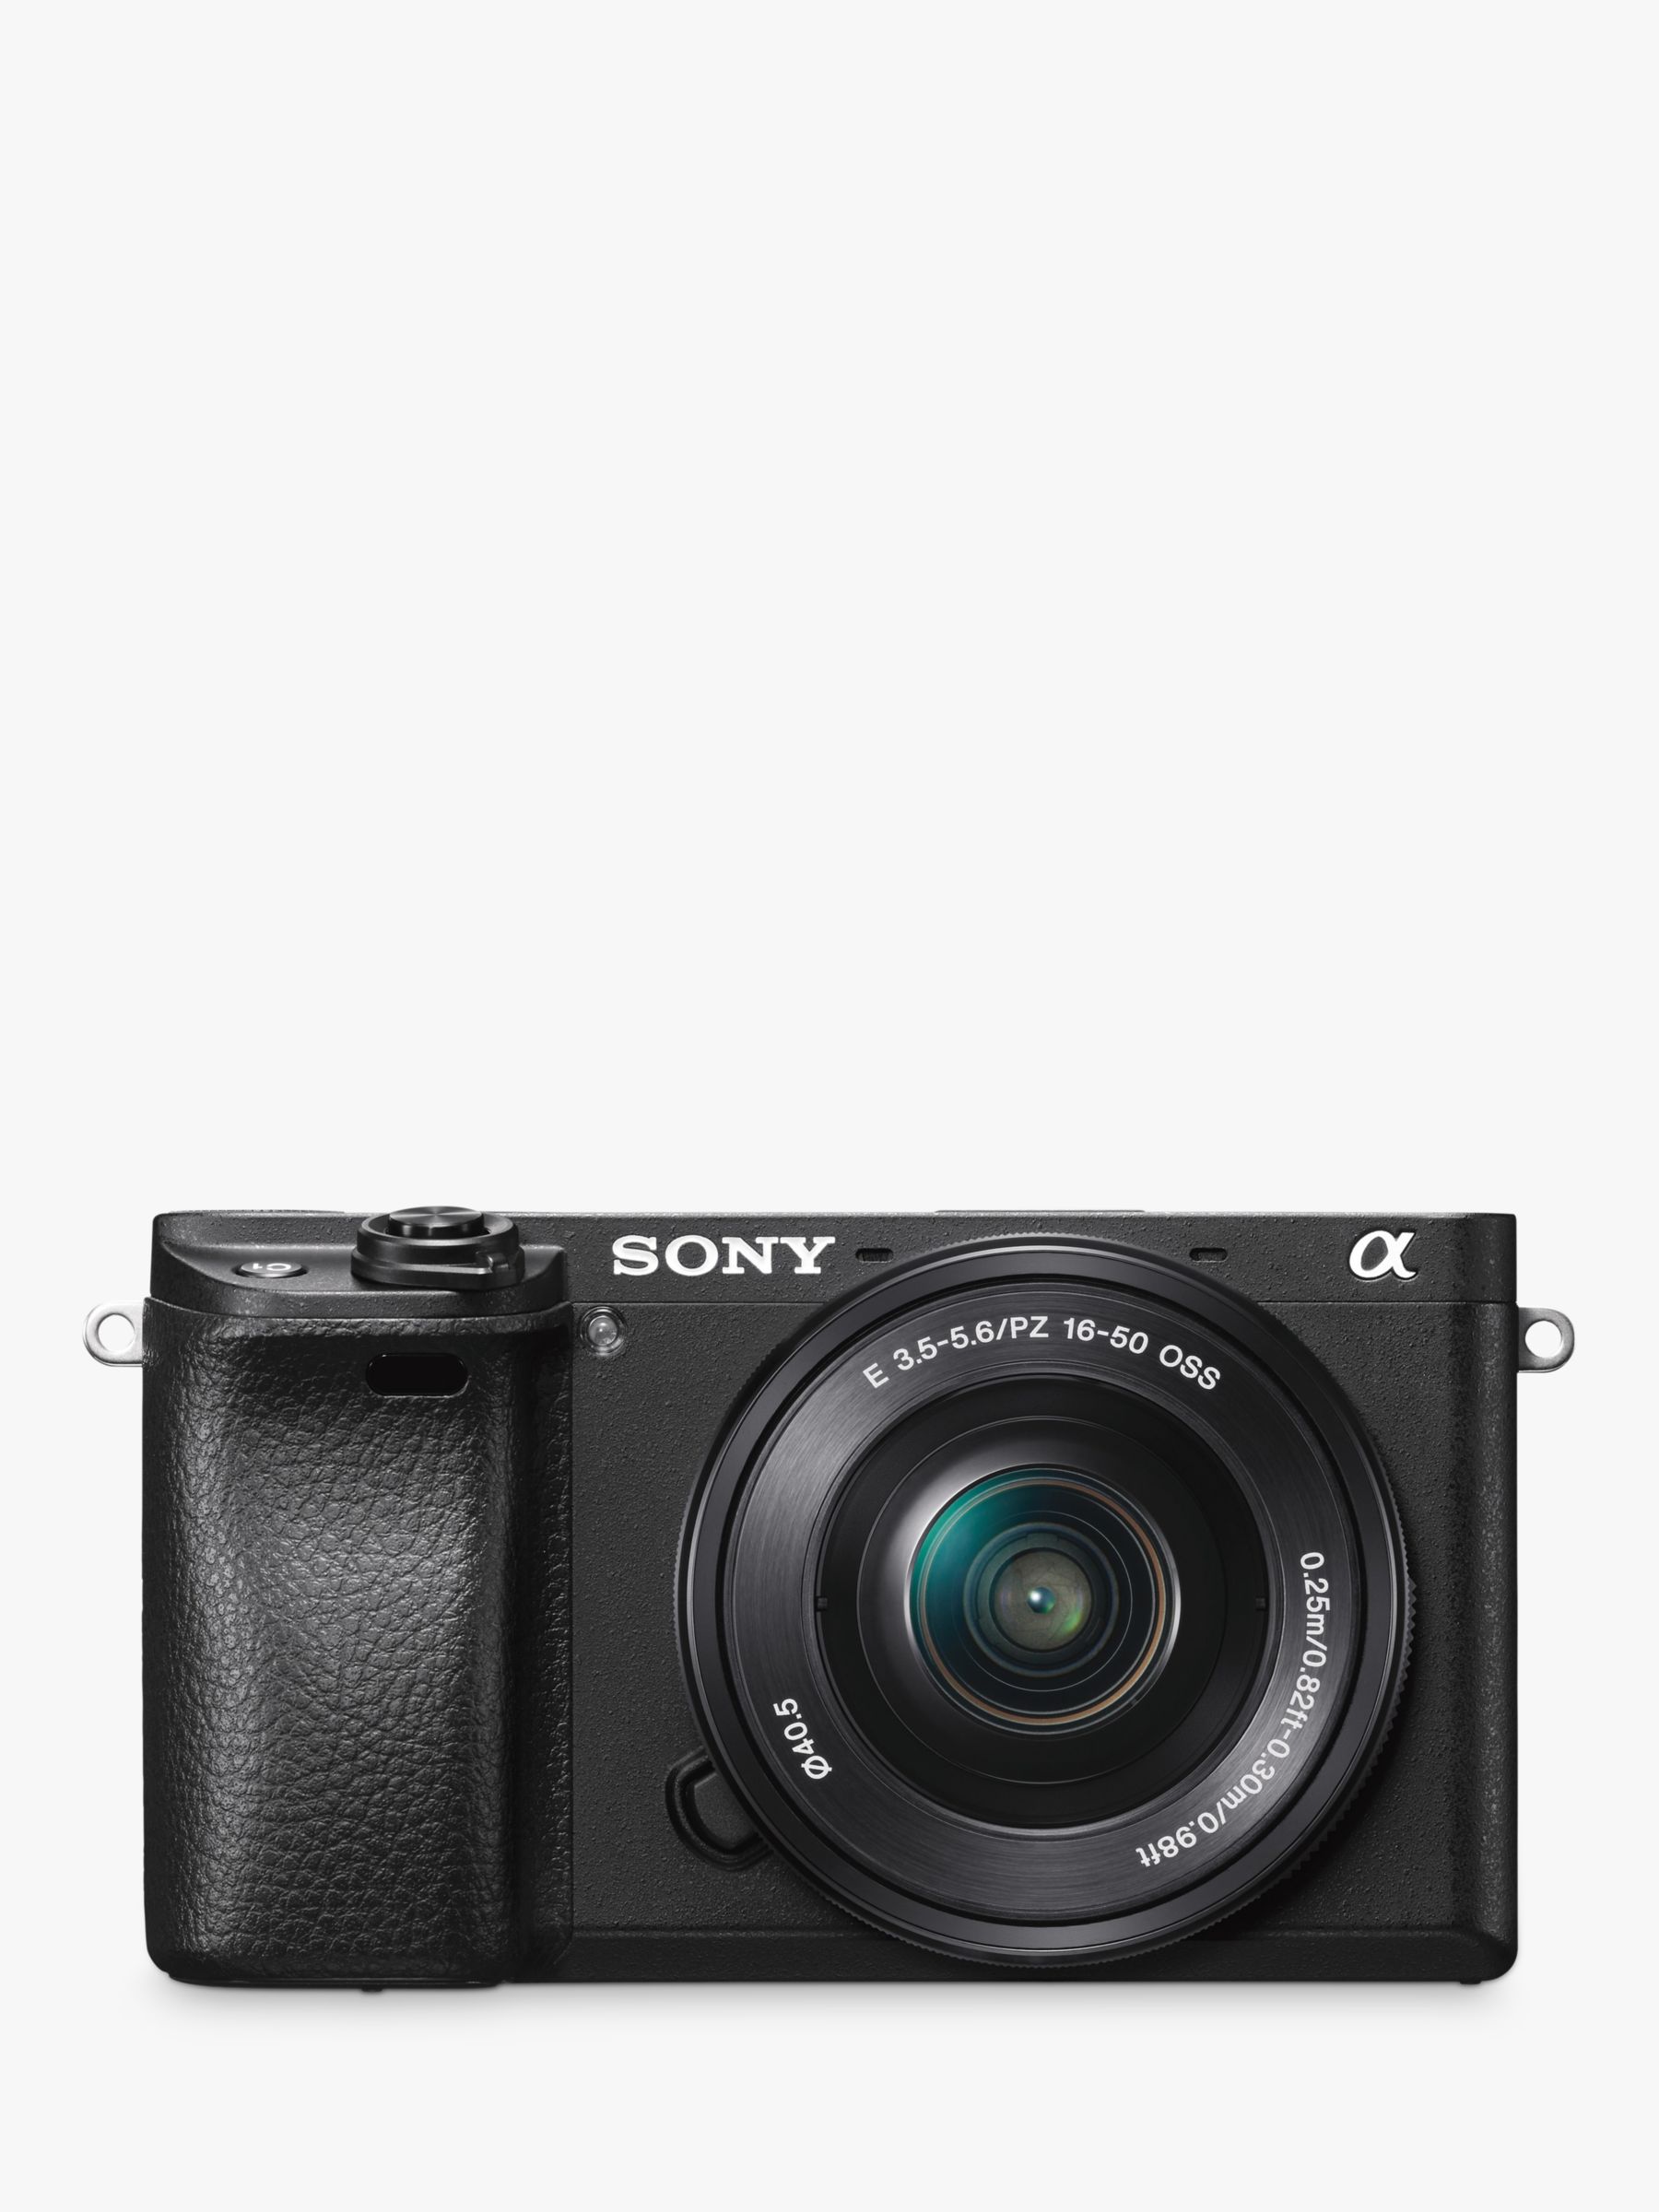 Sony A6300 Compact System Camera With 16-50mm Power Zoom Lens, 4K Ultra HD, 24.2MP, 4D Focus, Wi-Fi, NFC, OLED EVF, 3 Tilting Screen, Black